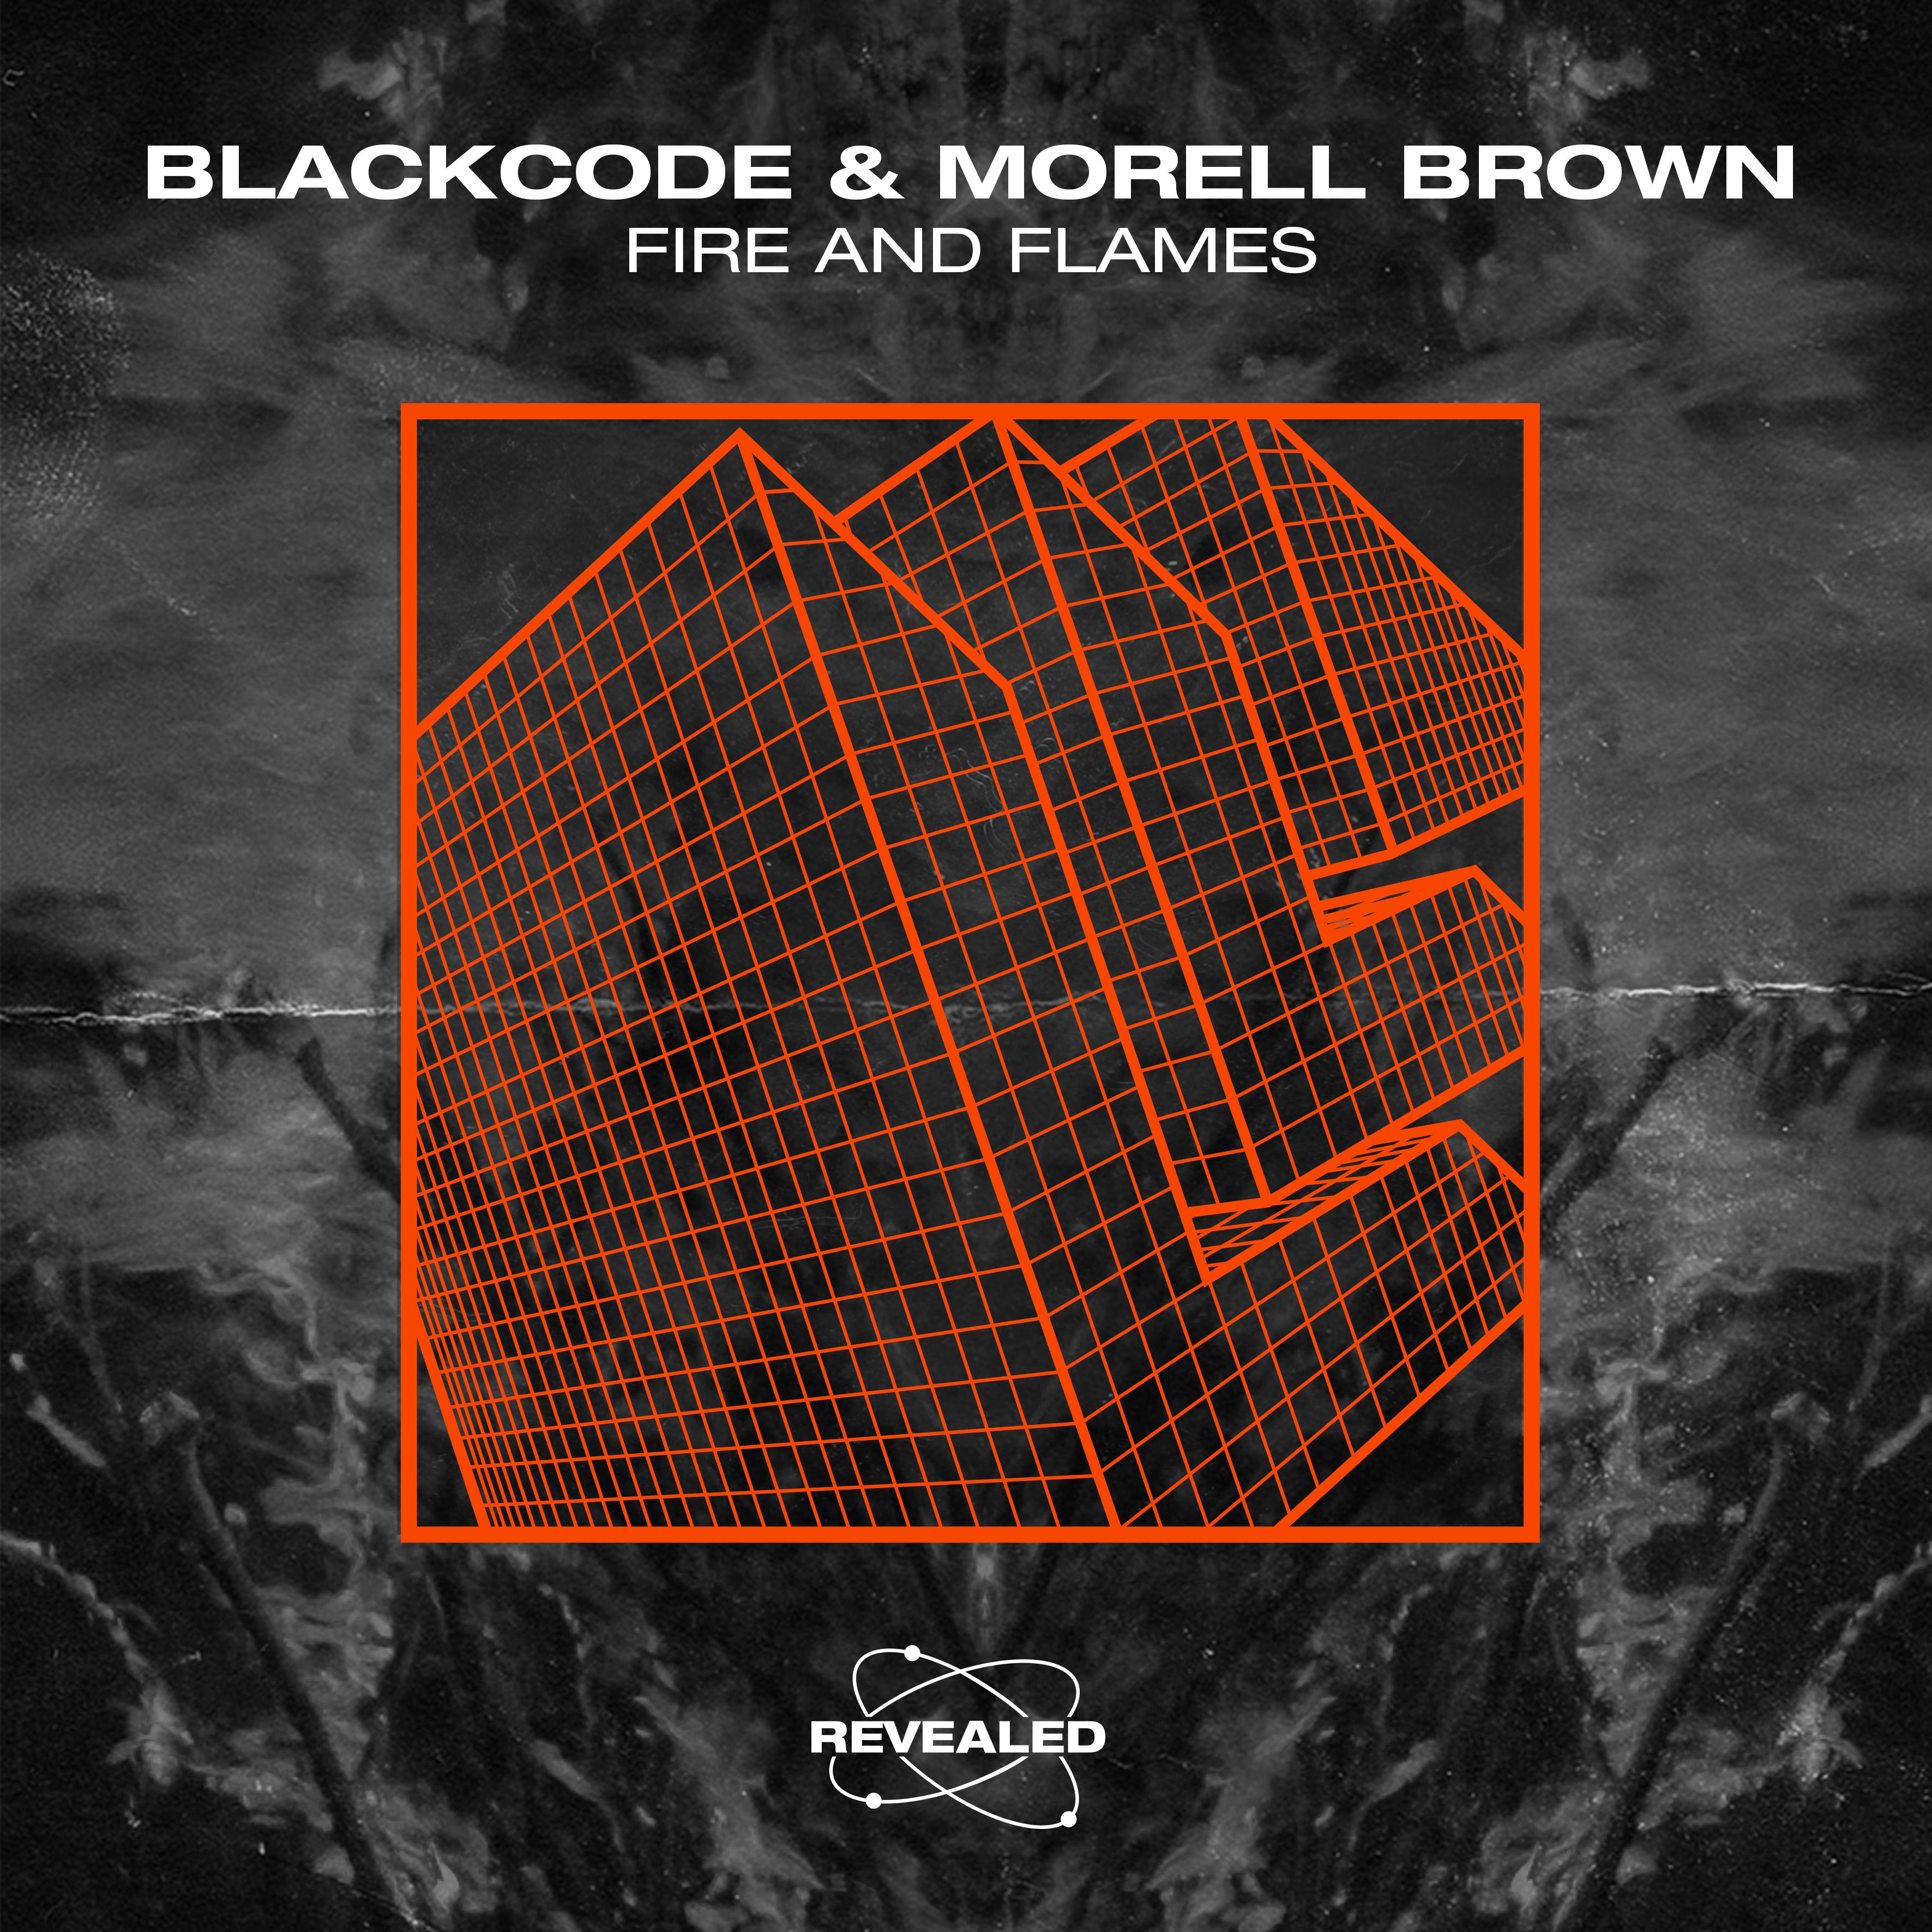 Fire and Flames歌词 歌手Blackcode / Morell Brown / Revealed Recordings-专辑Fire and Flames-单曲《Fire and Flames》LRC歌词下载